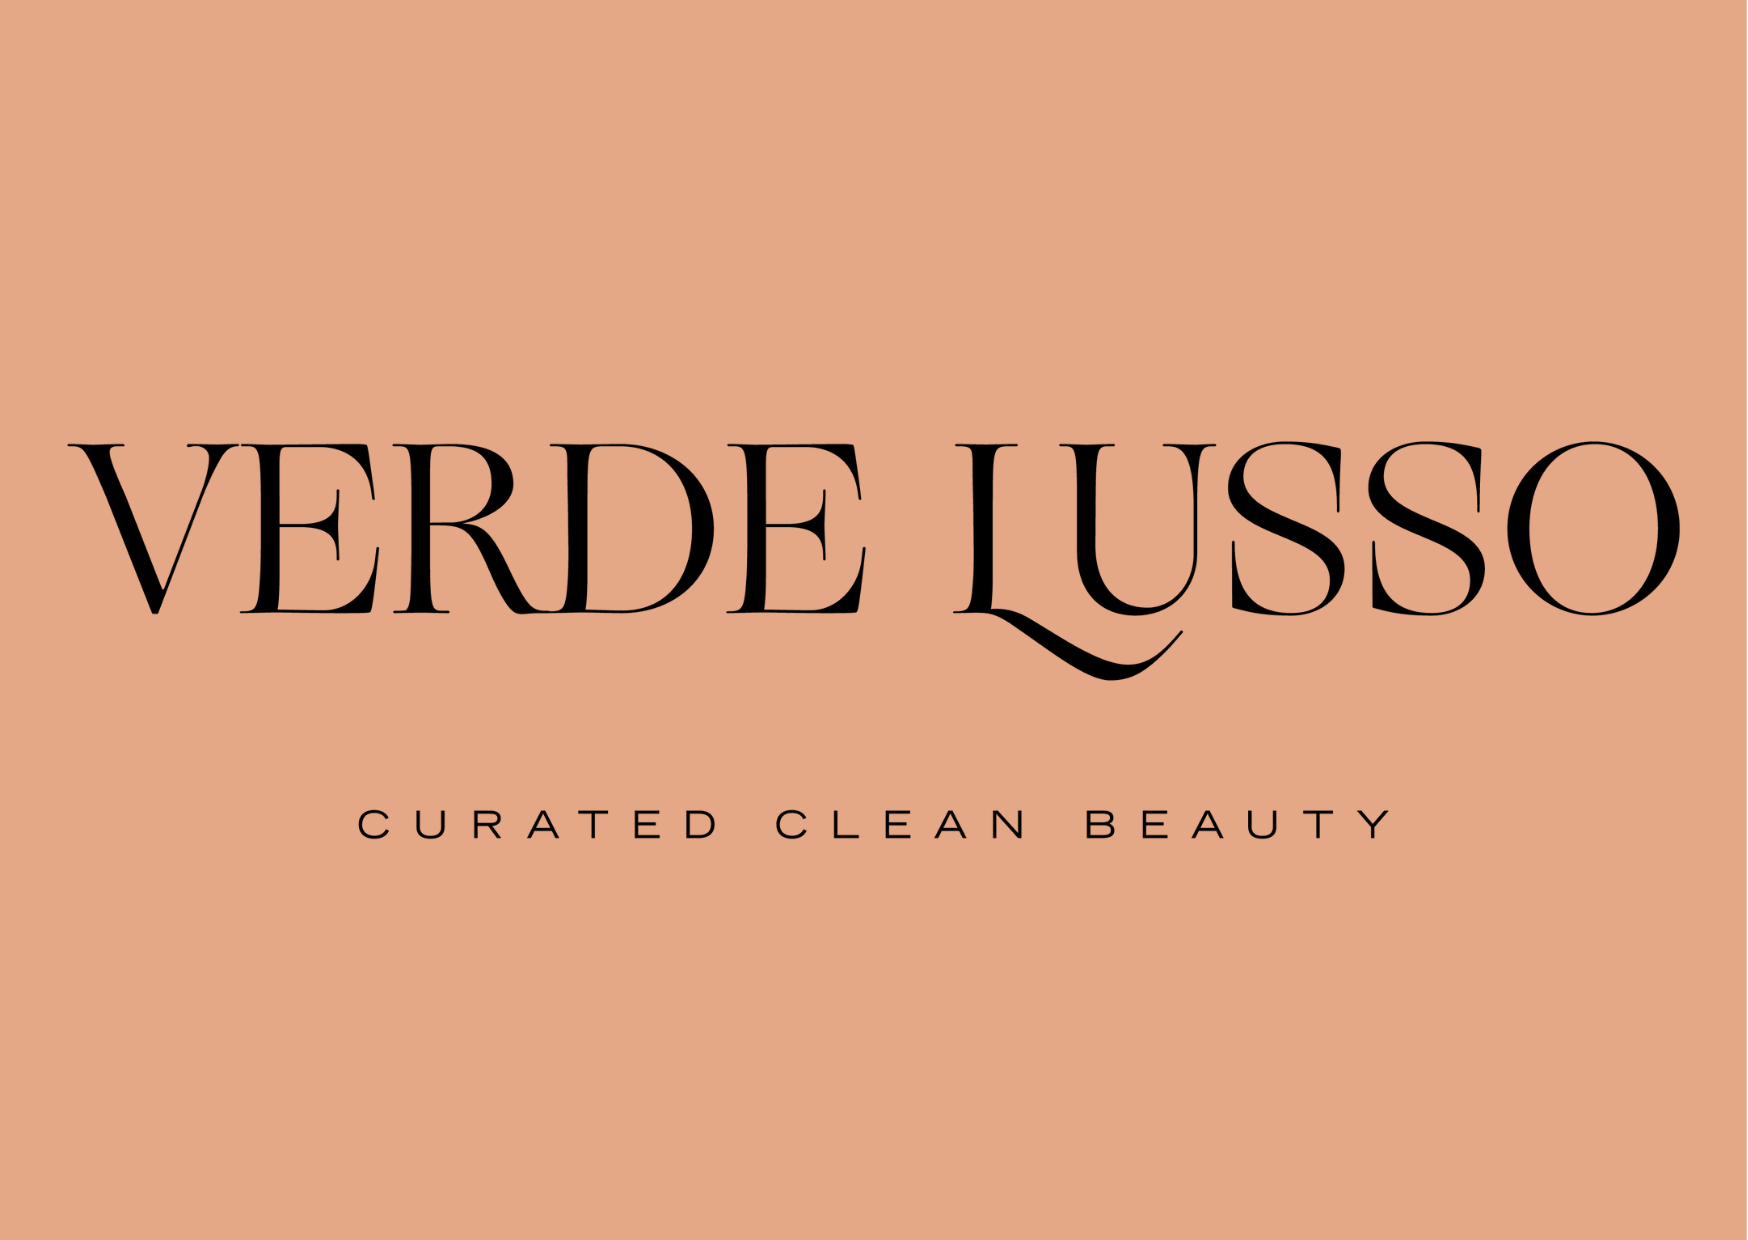 Verde Lusso Gift Card